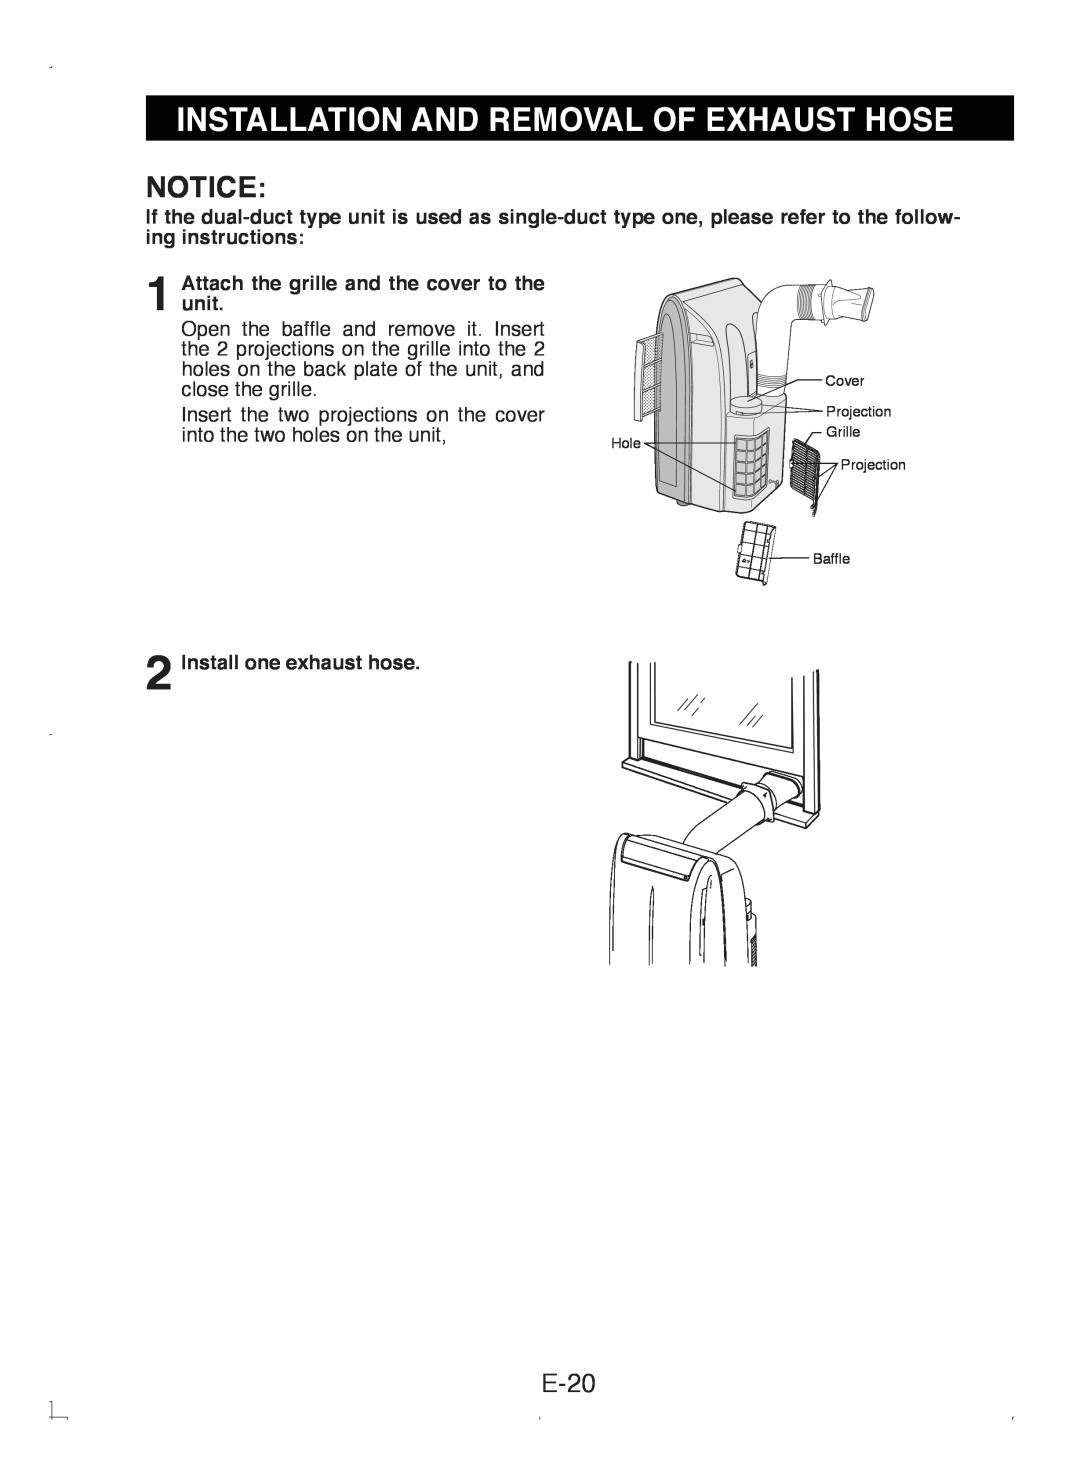 Sony CV-P12PX operation manual E-20, Installation And Removal Of Exhaust Hose 